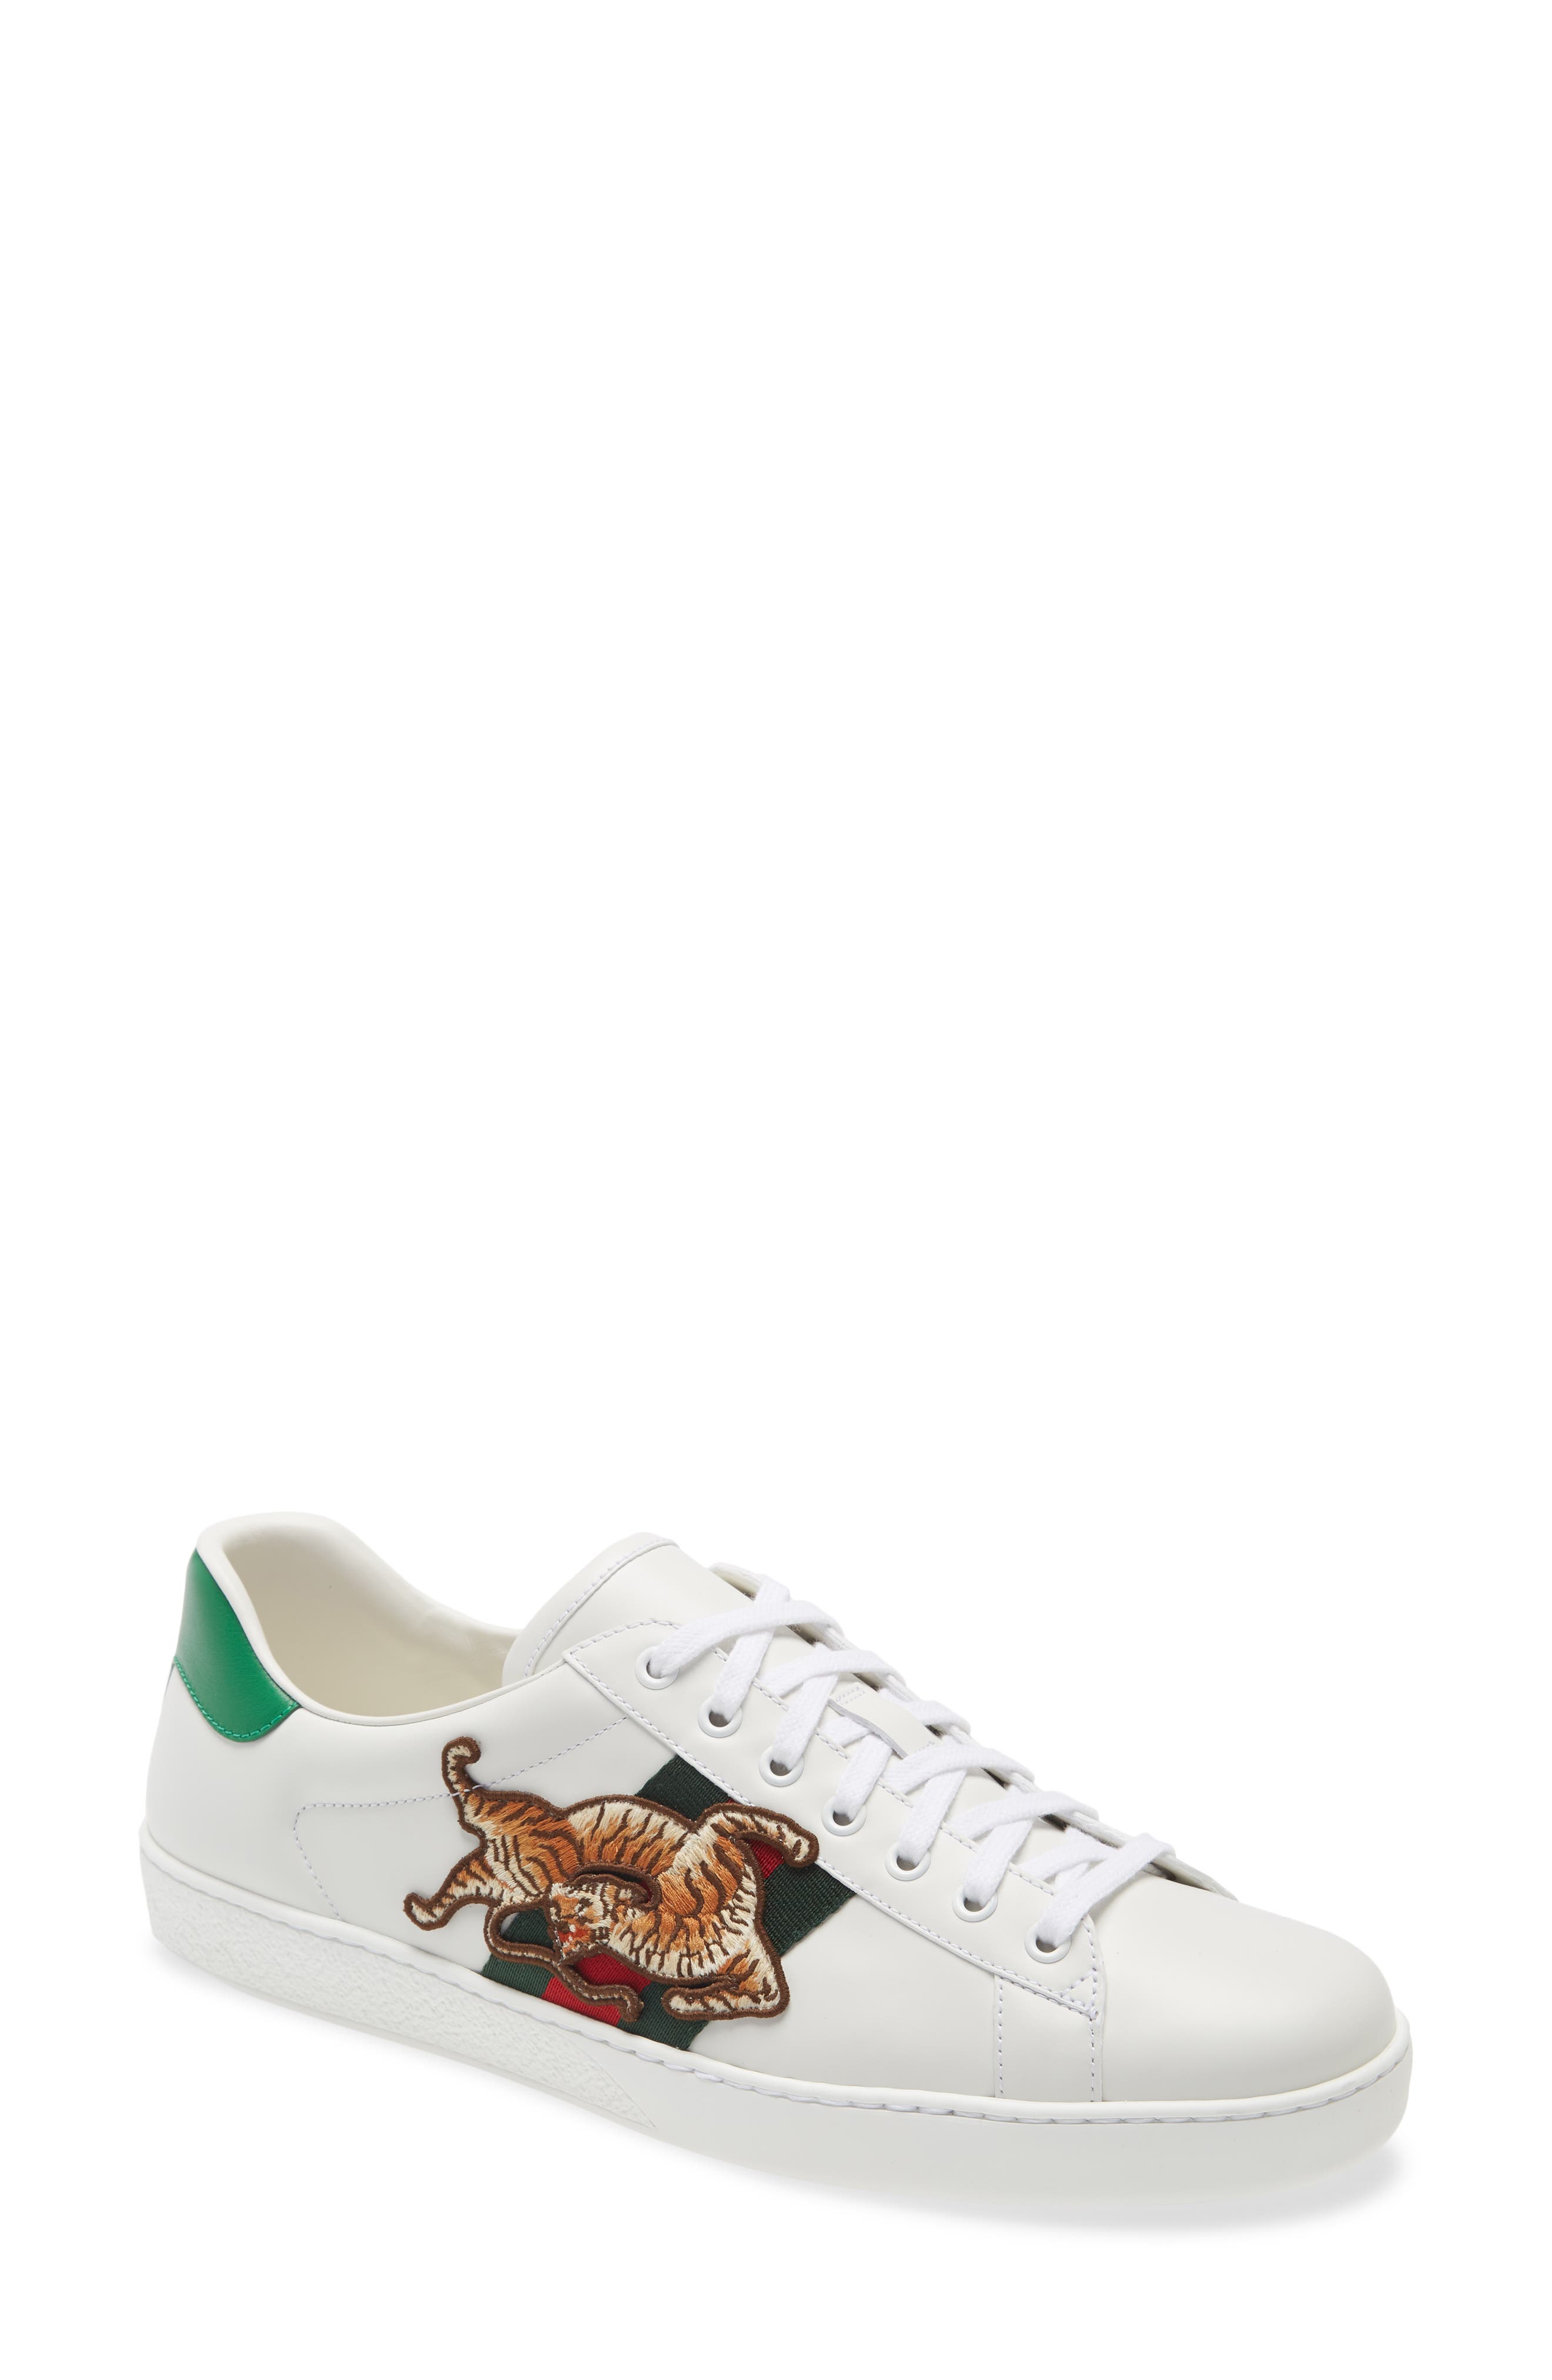 nordstrom gucci ace sneakers